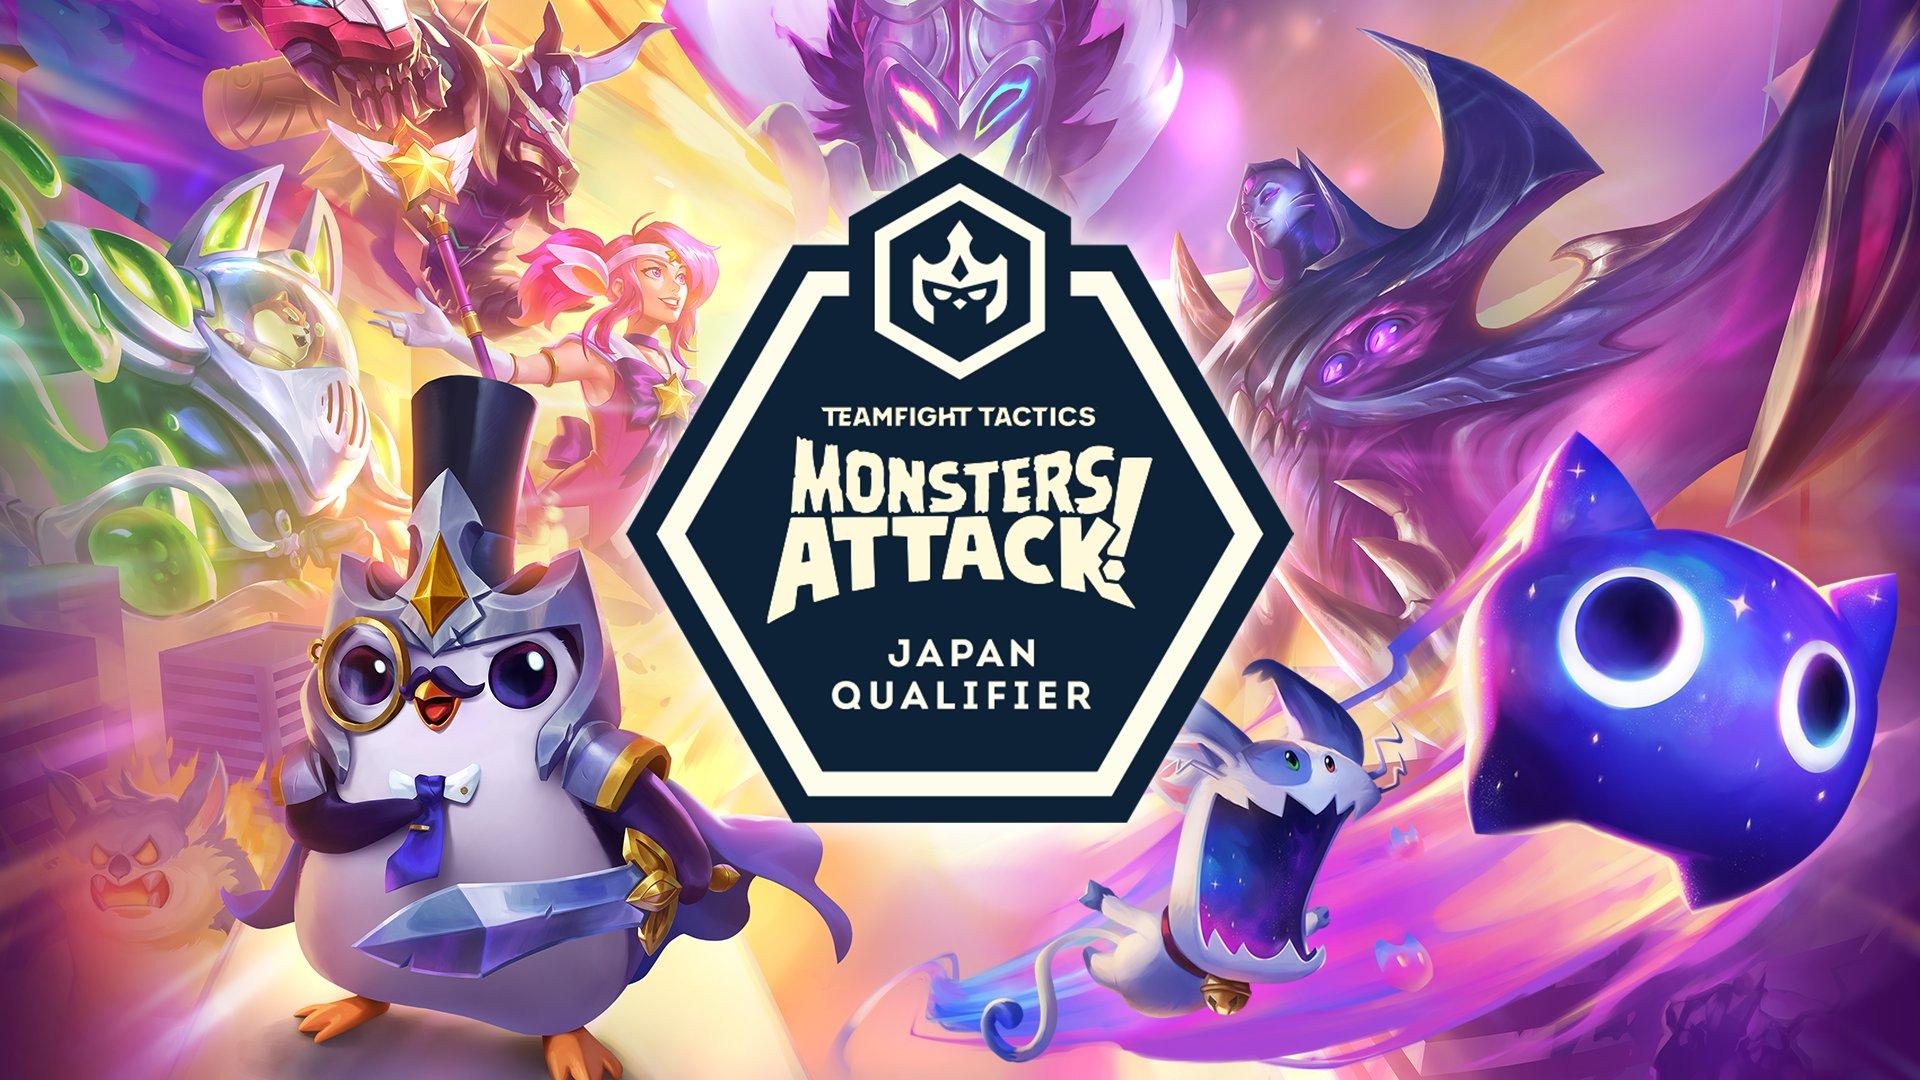 TFT Monsters Attack! Japan Qualifier feature image